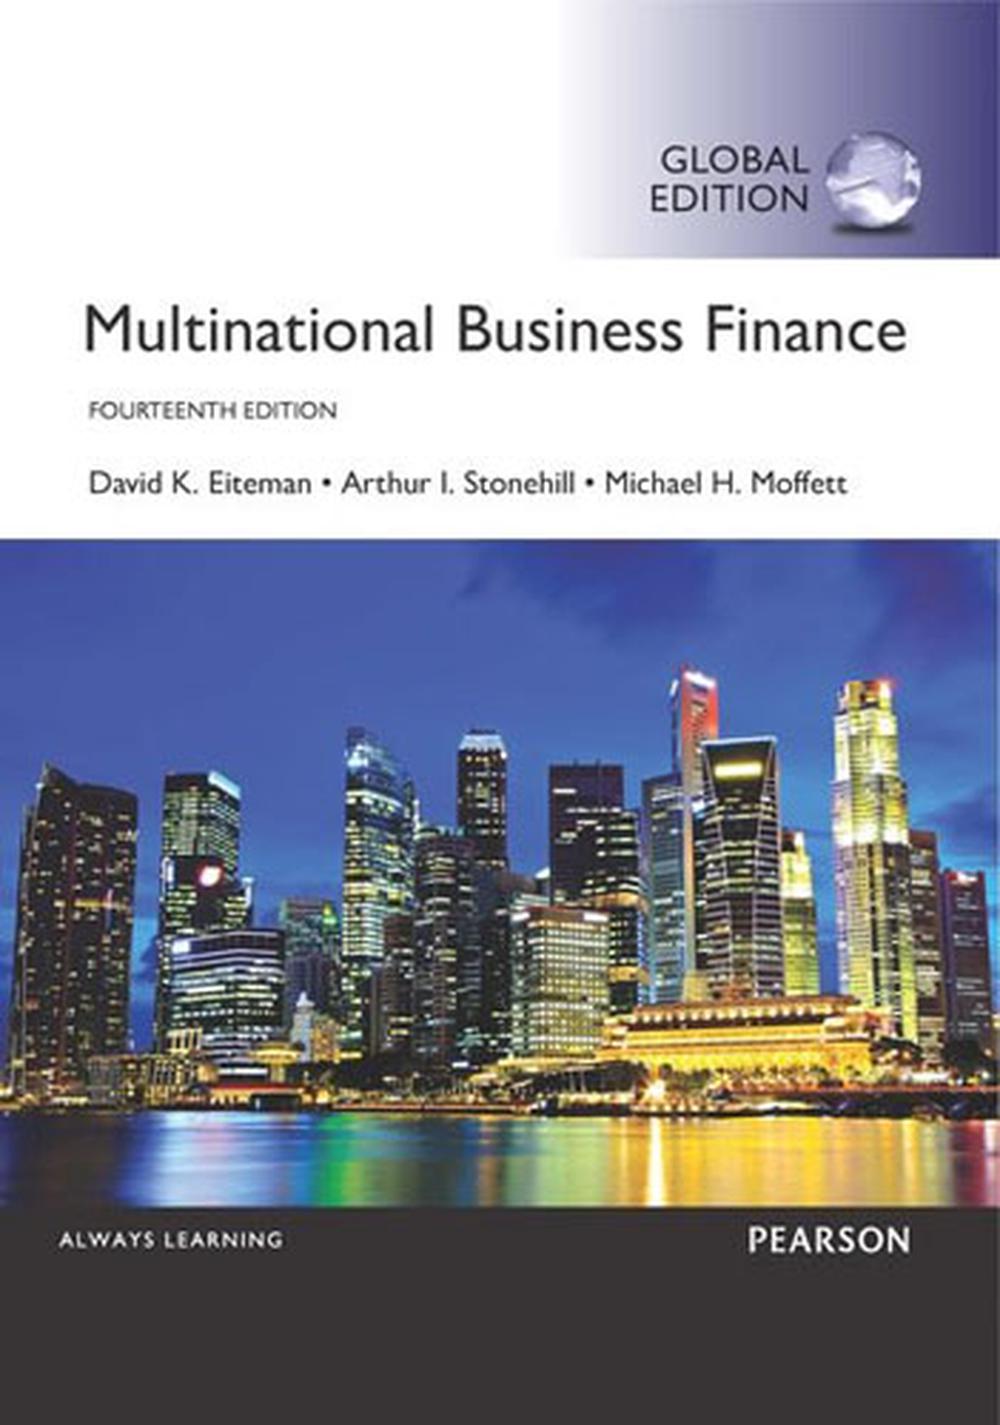 Multinational Business Finance, Global Edition 14th Edition by David K